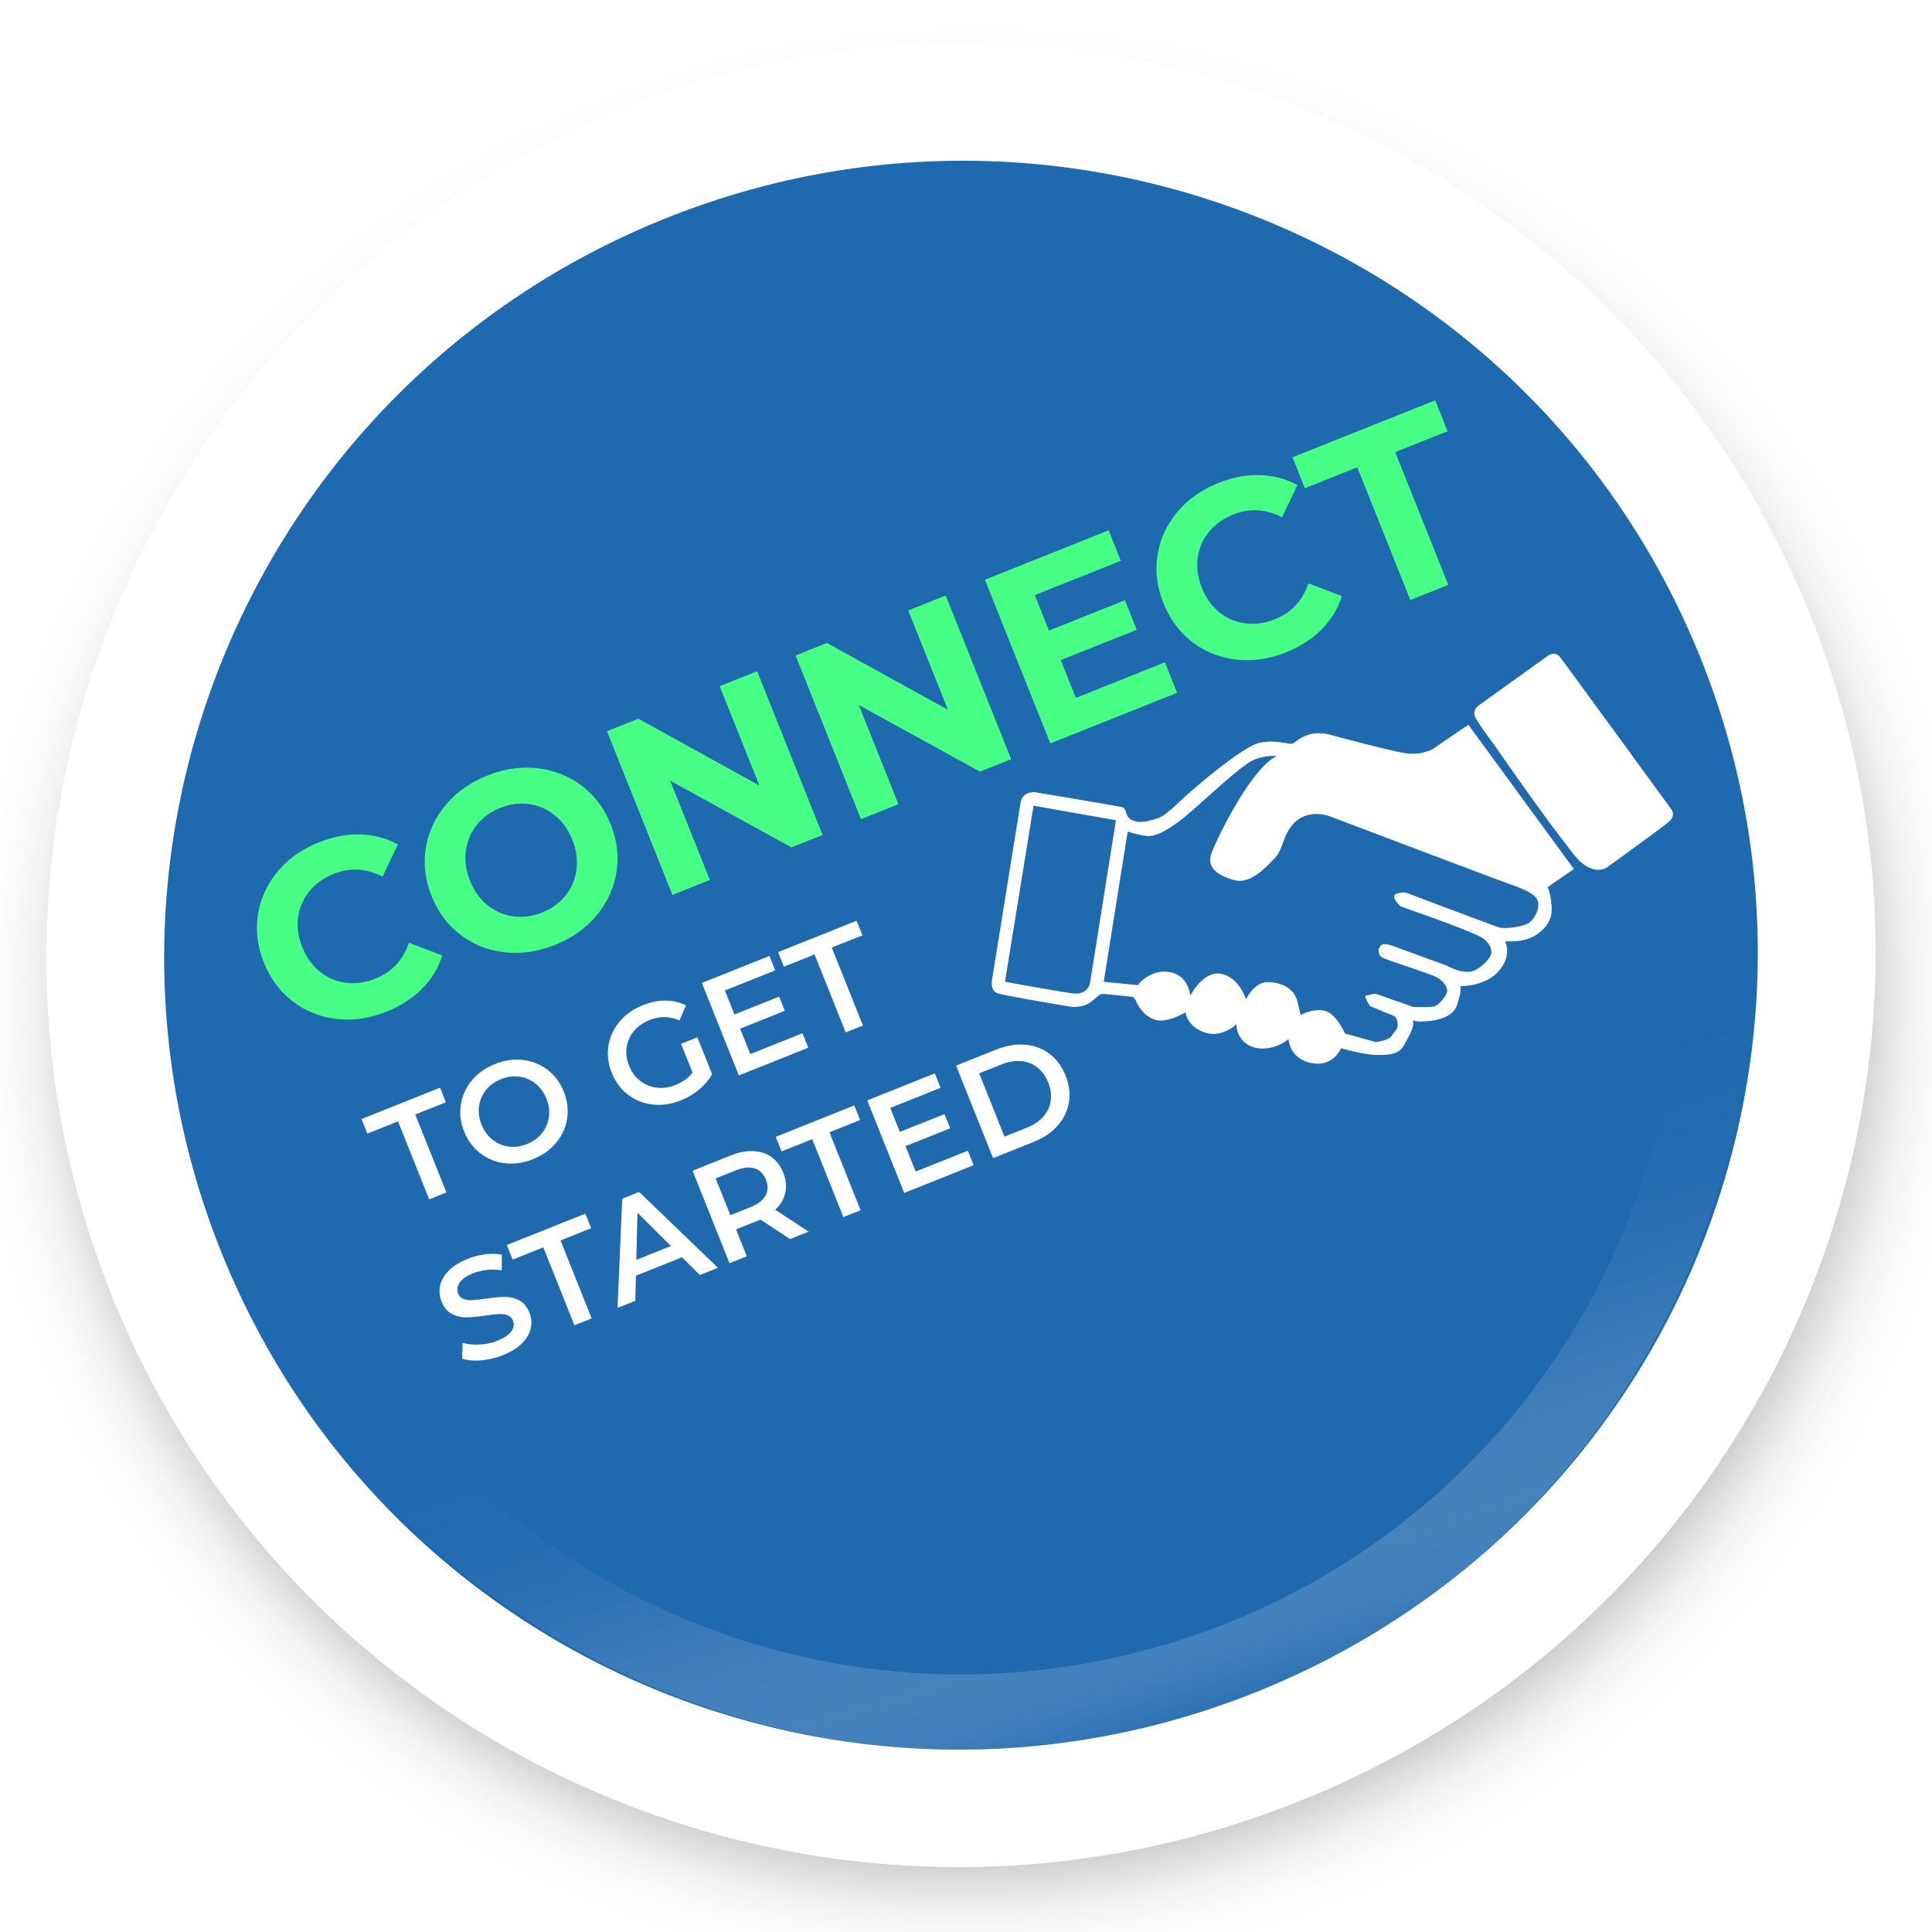 Connect to get started